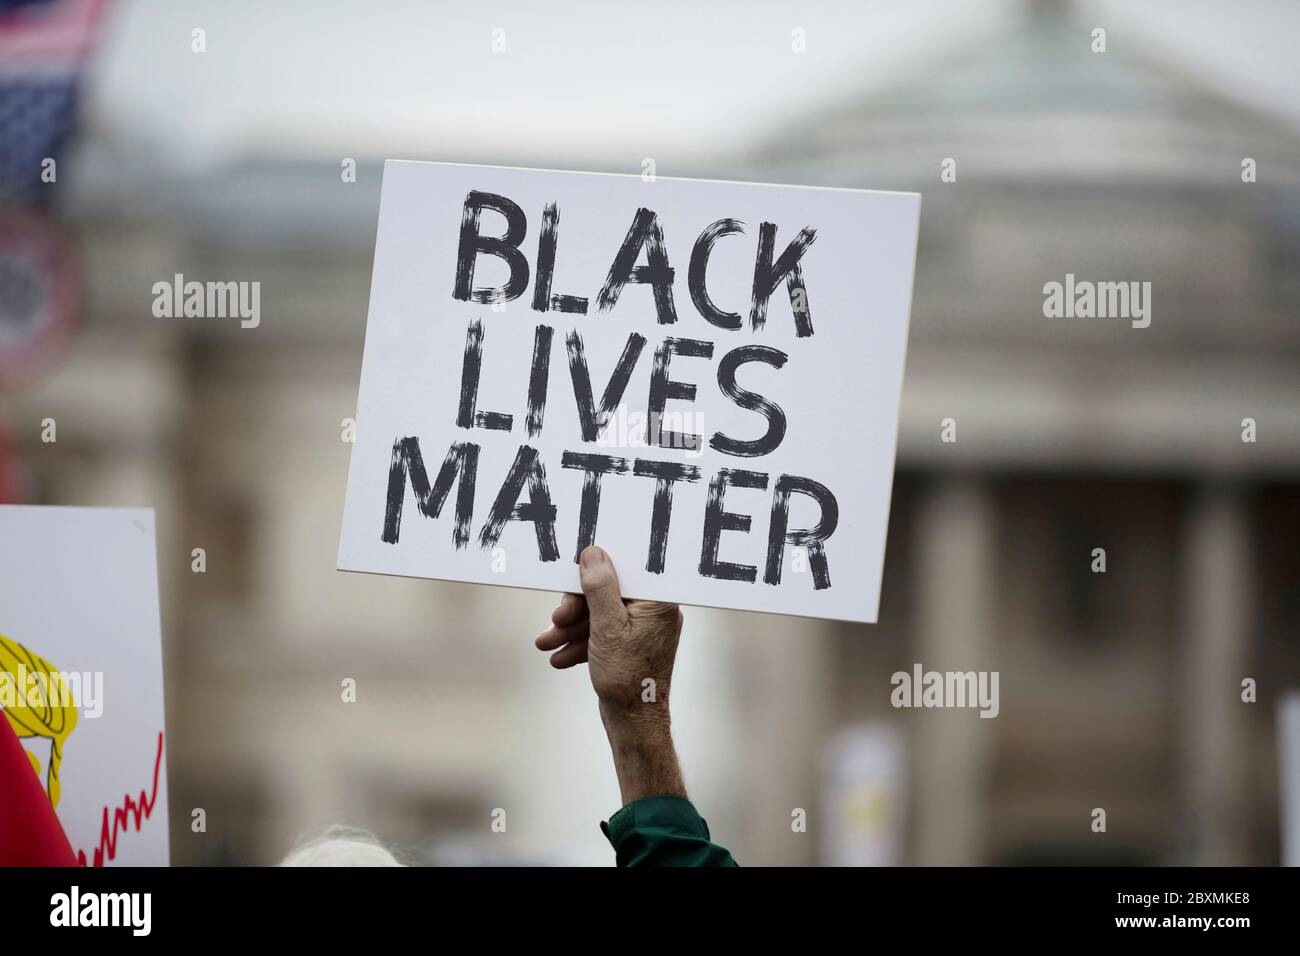 A person holding a black lives matter banner at a protest Stock Photo